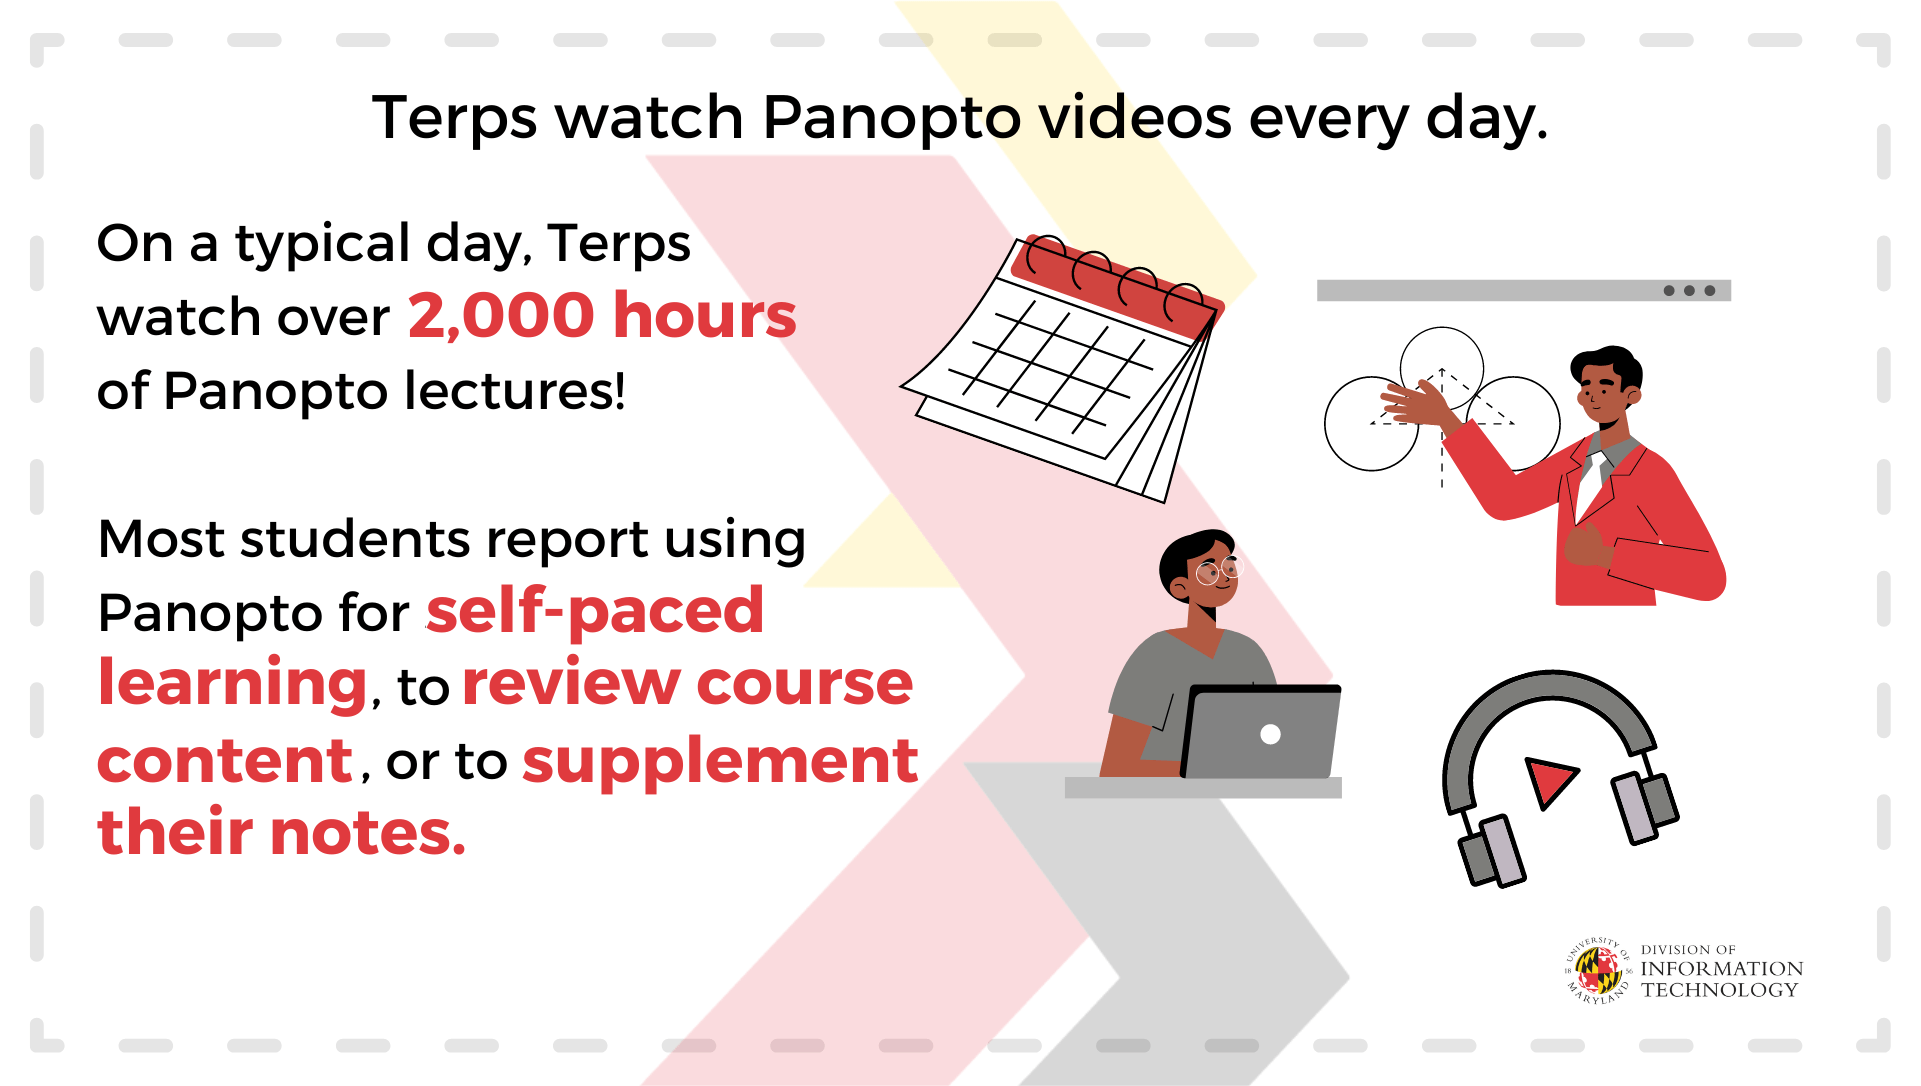 Terps watch Panopto videos every day. On a typical day, Terps watch over 2,000 hours of Panopto lectures! Most students report using Panopto for self-paced learning, to review course content, or to supplement their notes.